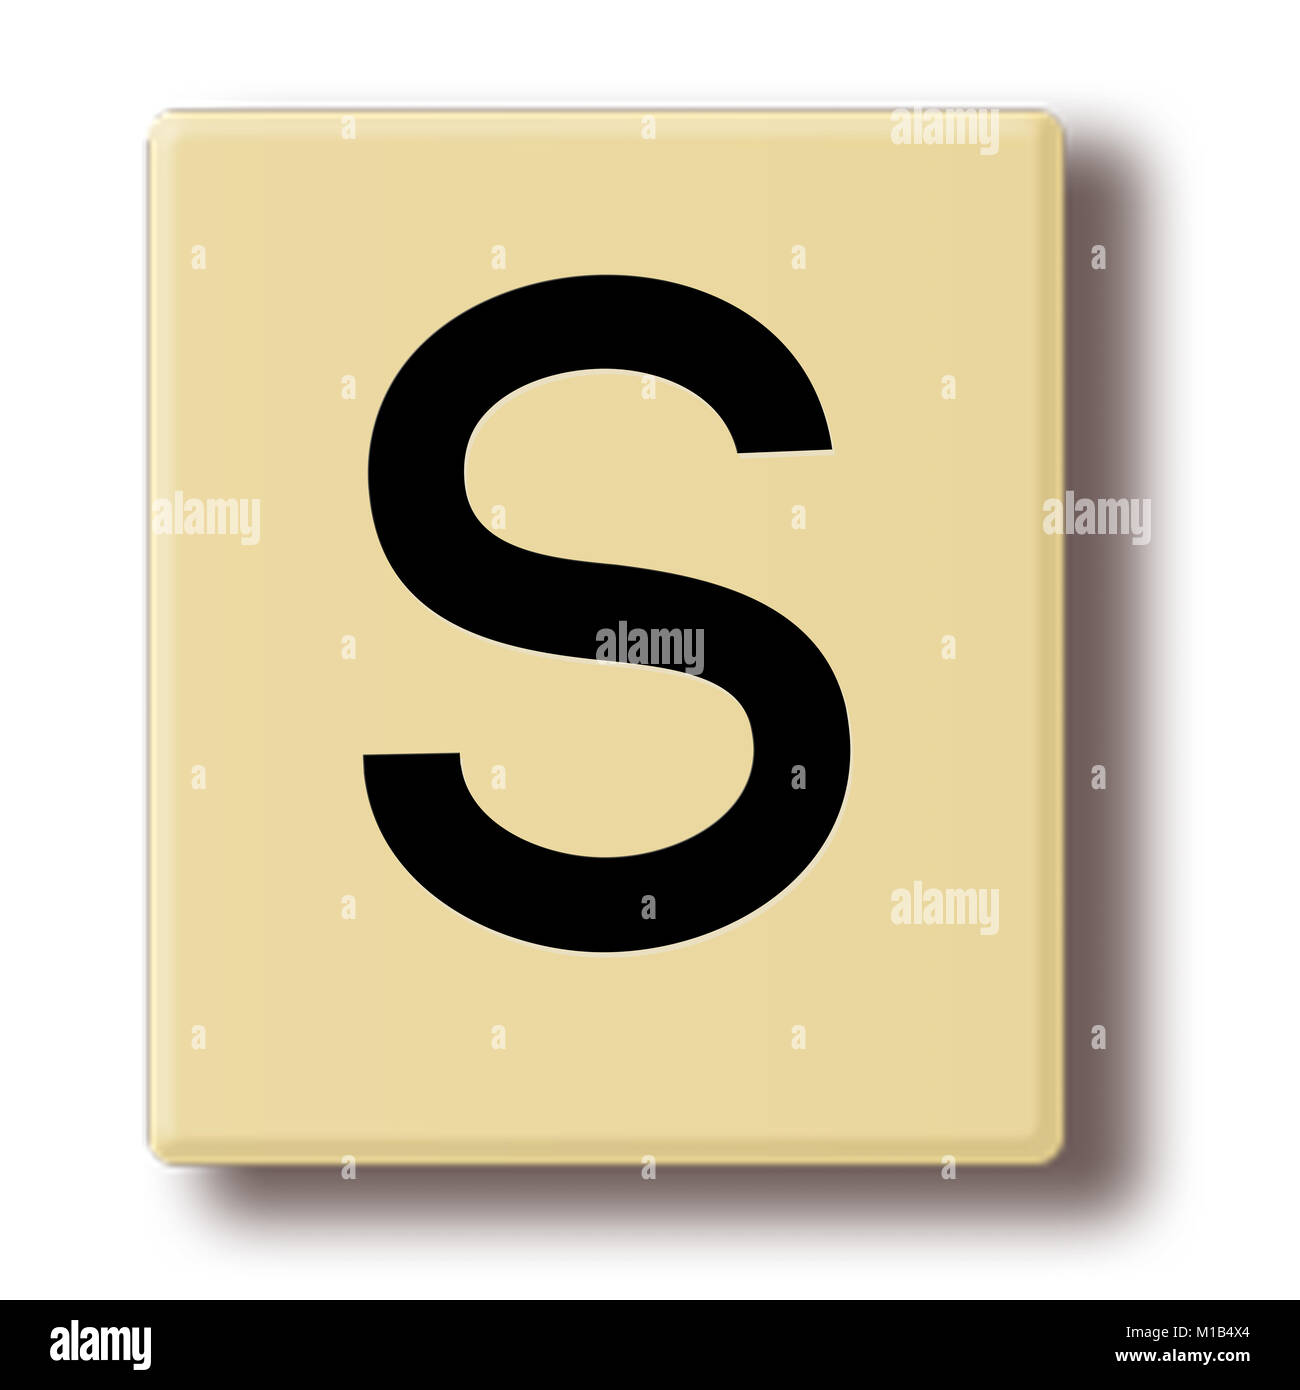 Letter tile in the style of the game Scrabble Stock Photo